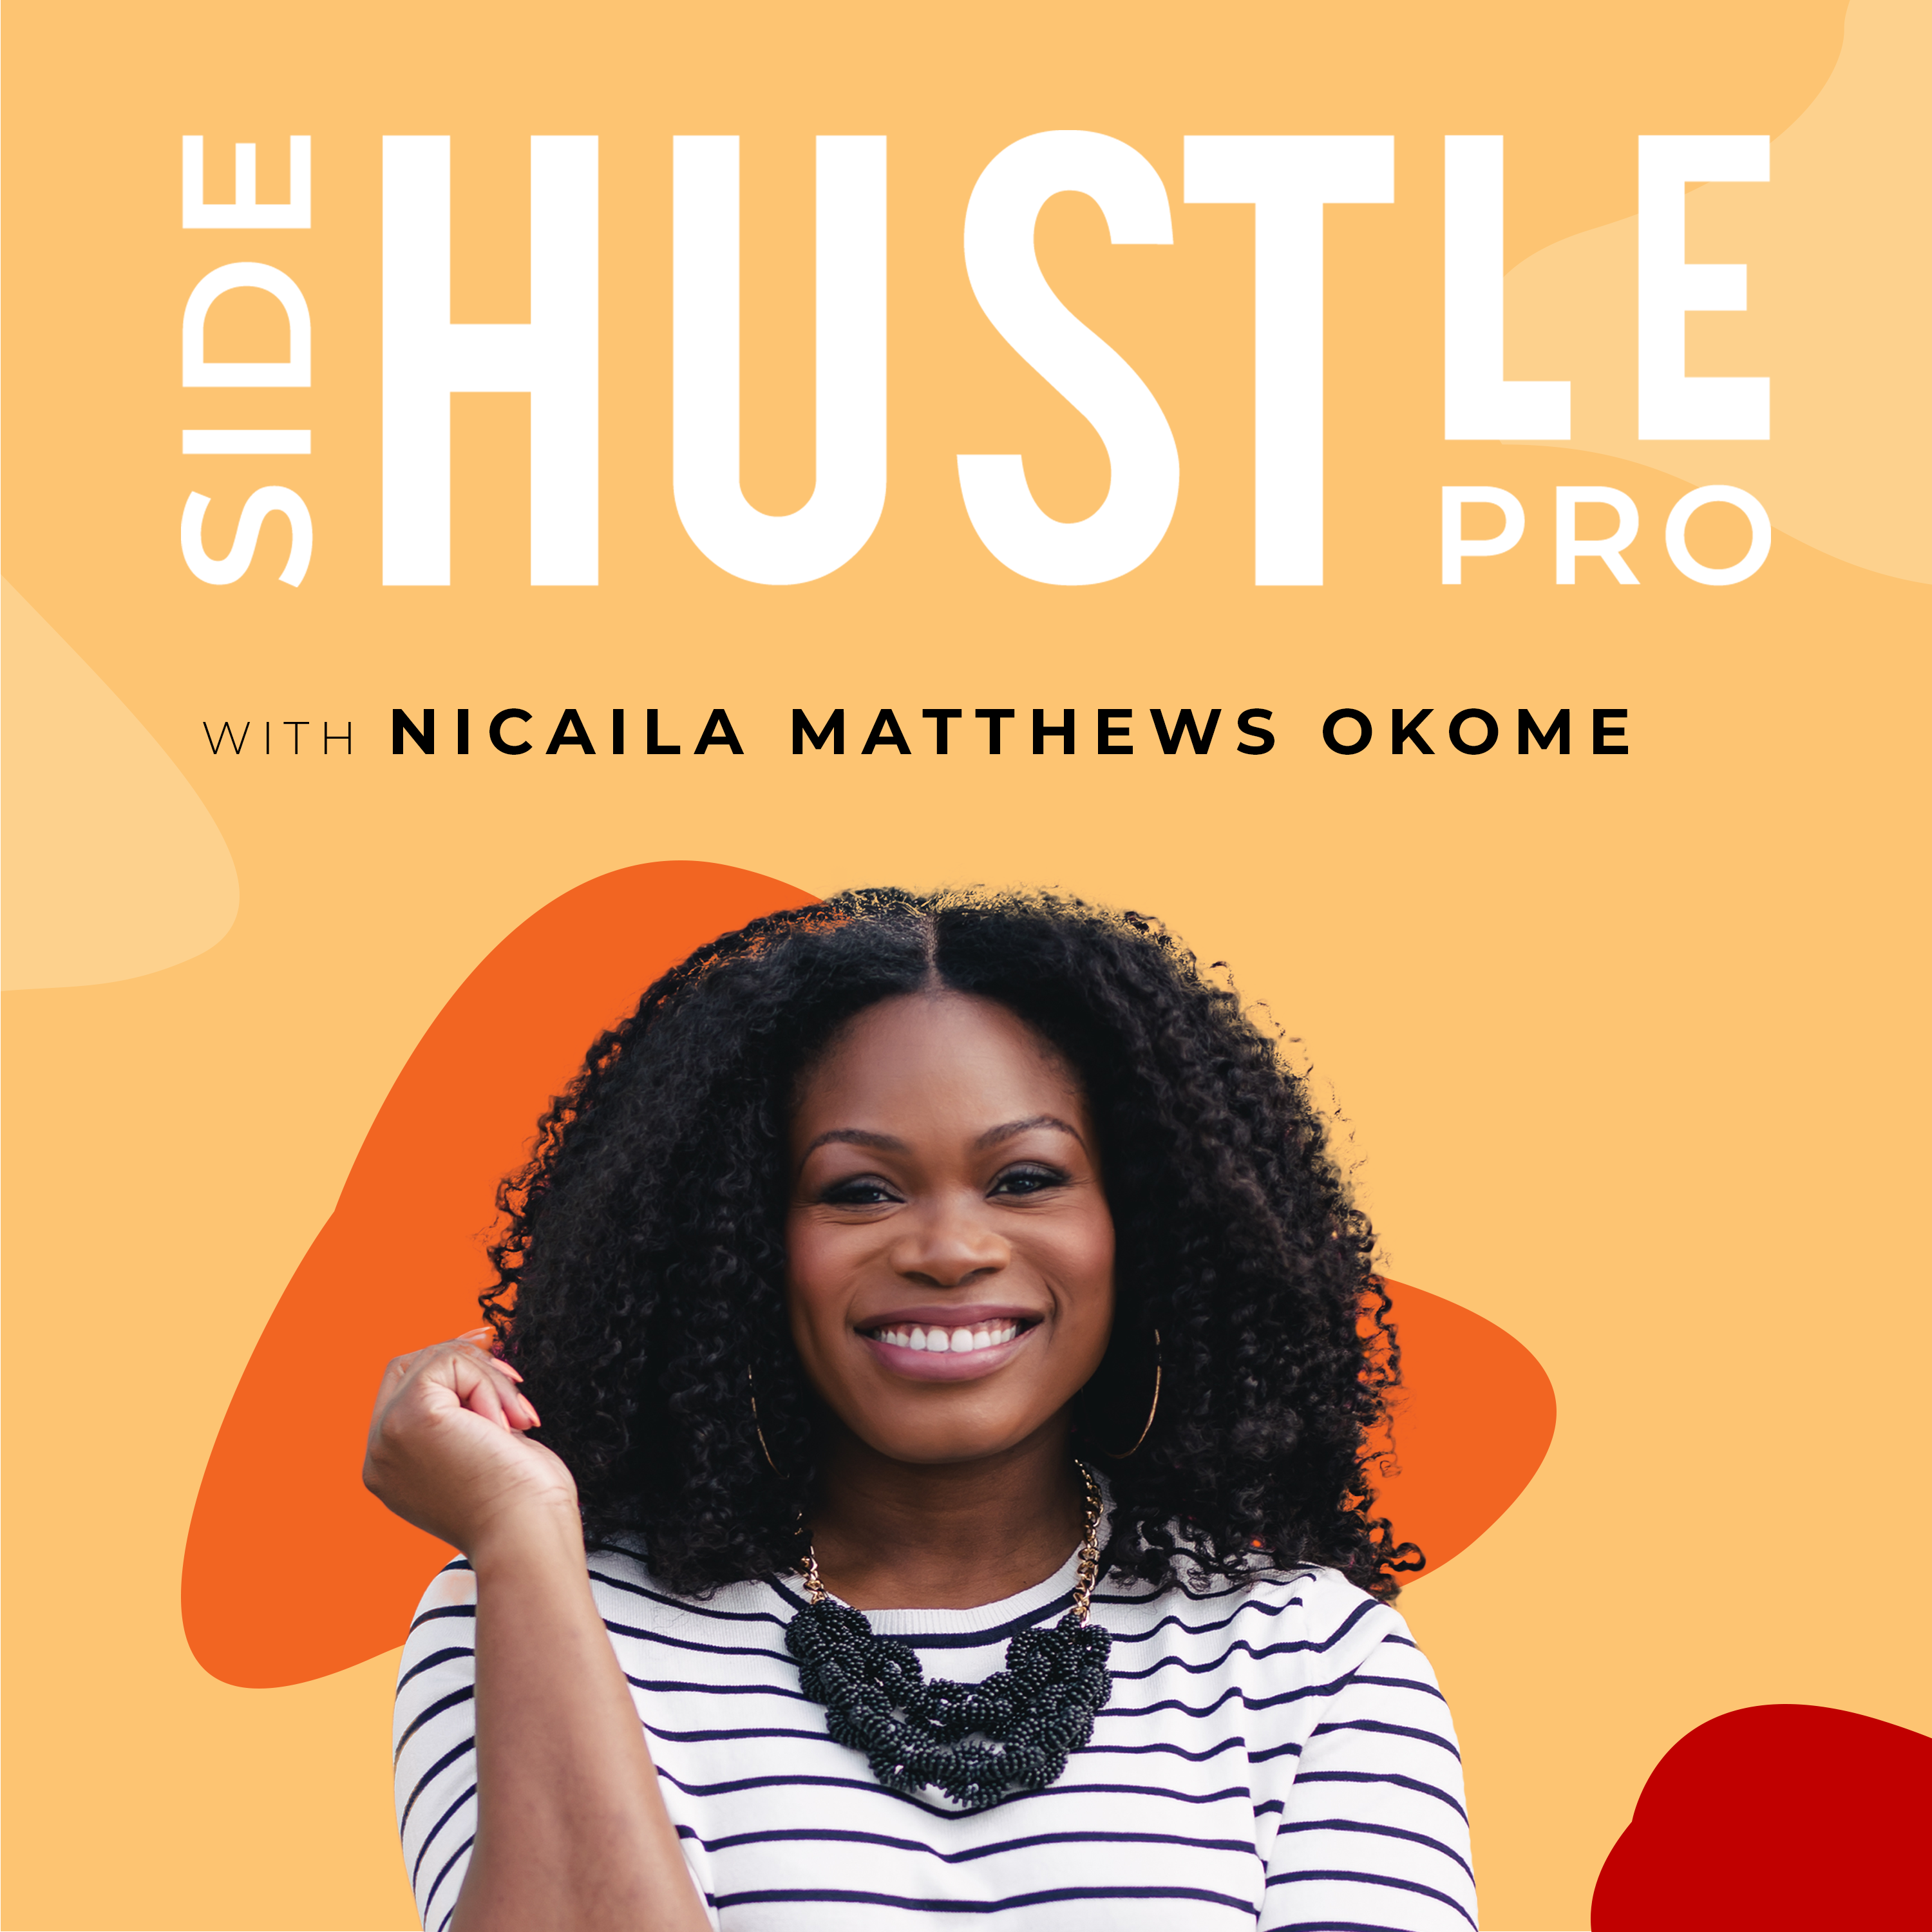 233: How to Overcome Doubt and Move Forward With Your Side Hustle